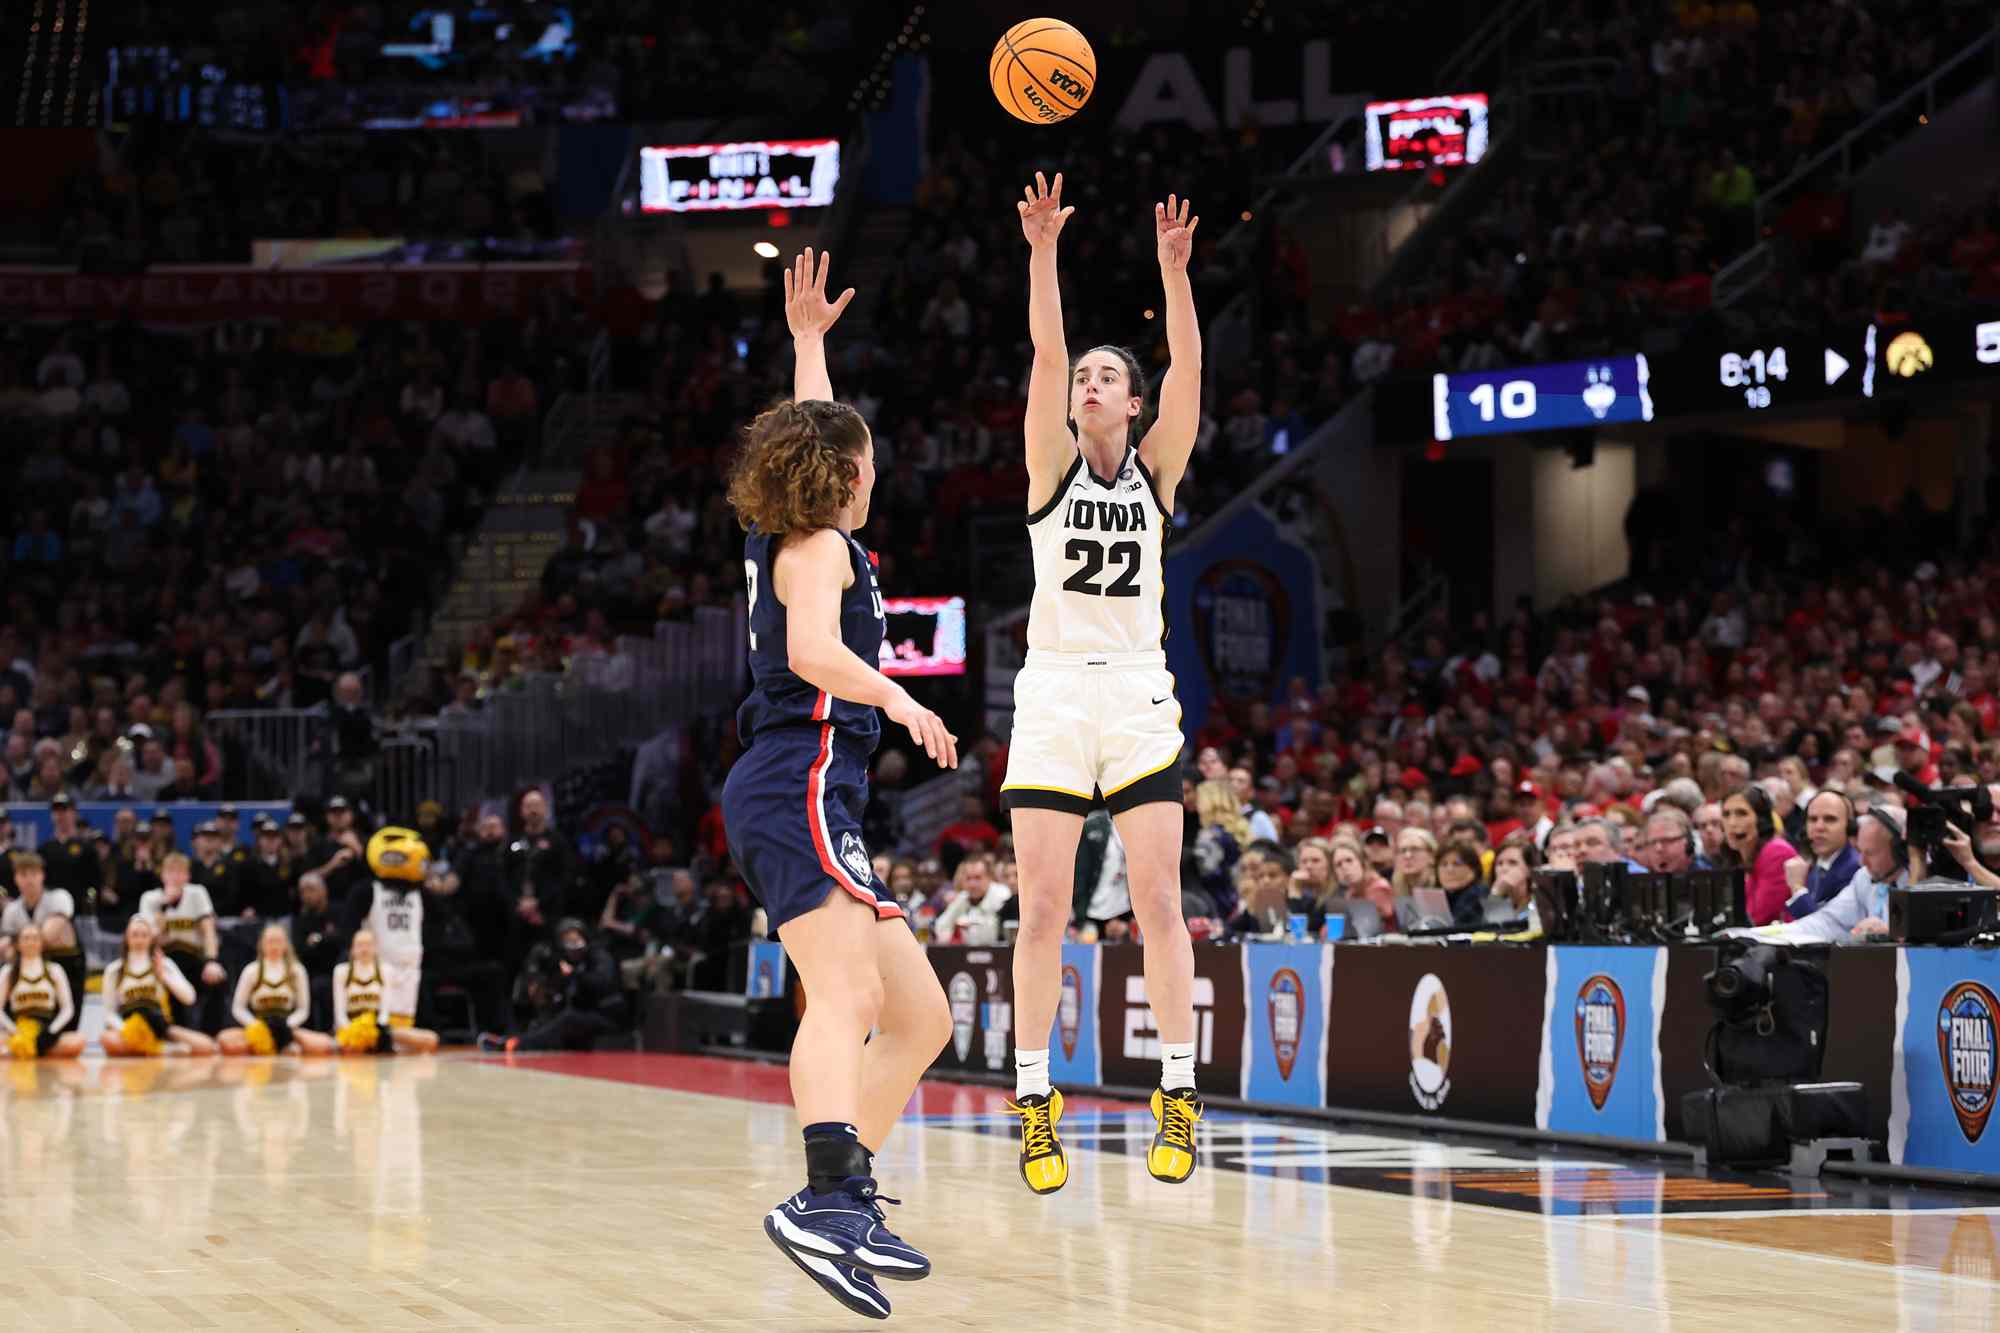 Caitlin Clark #22 of the Iowa Hawkeyes shoots the ball over Ashlynn Shade #12 of the UConn Huskies in the first half during the NCAA Women's Basketball Tournament Final Four semifinal game at Rocket Mortgage Fieldhouse on April 05, 2024